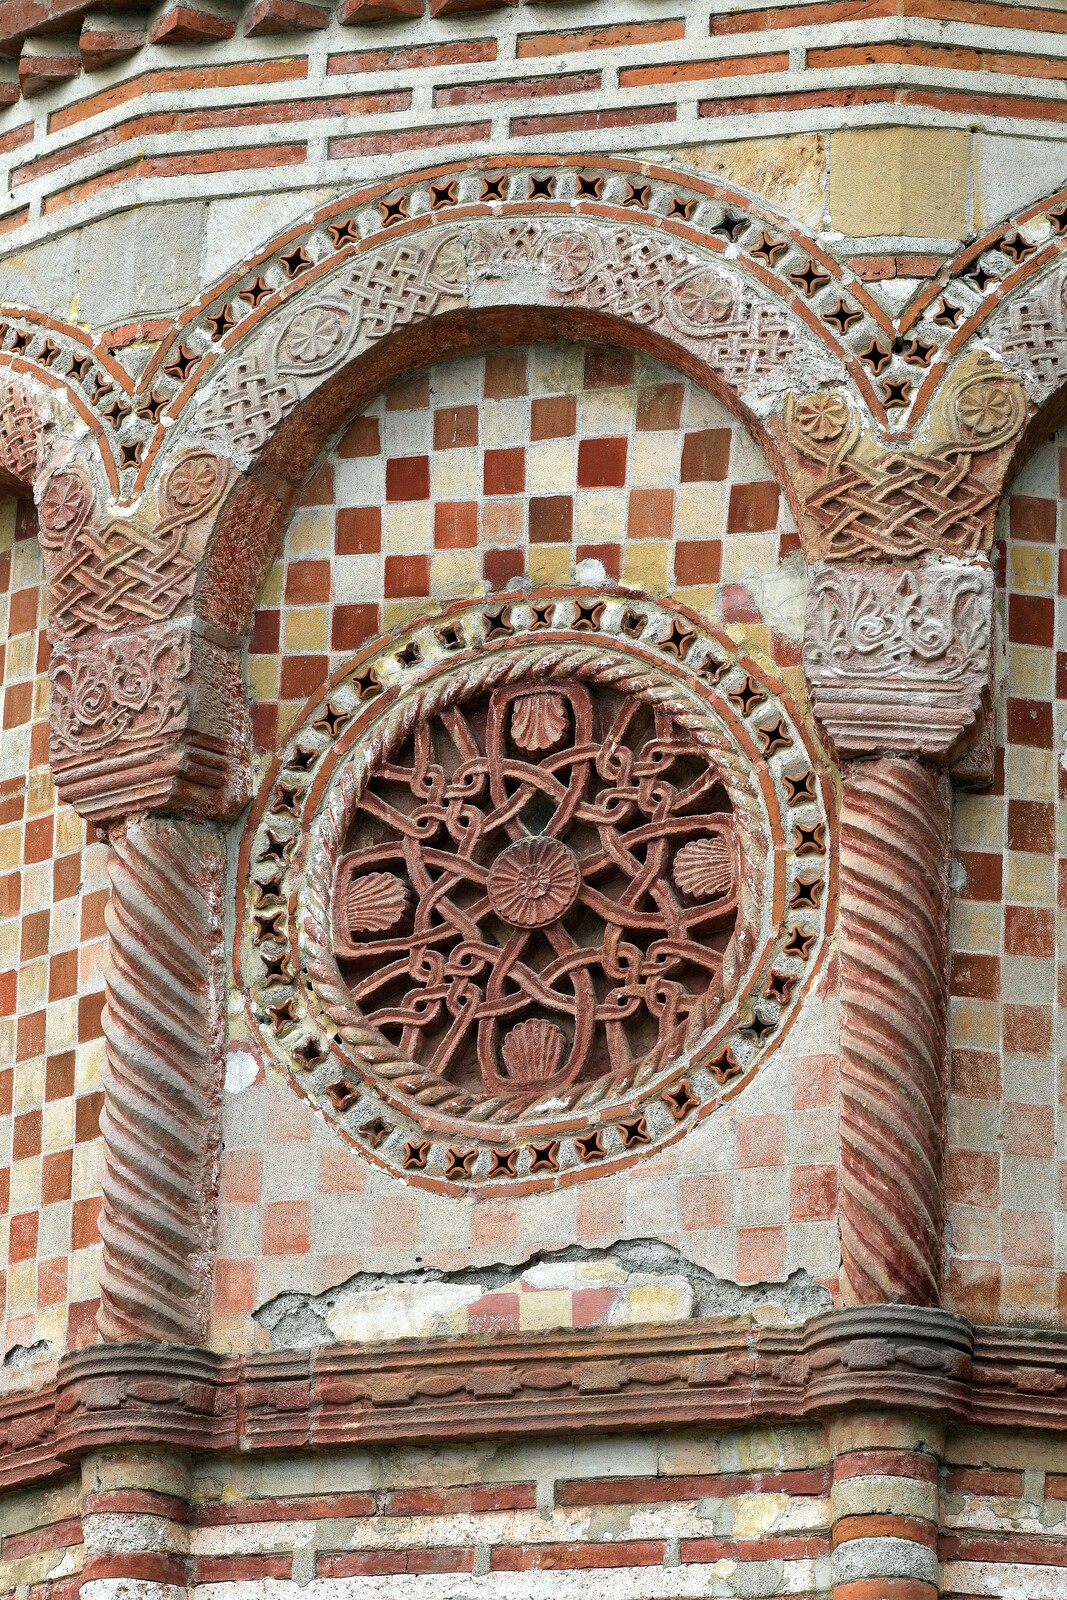 The Аrch and Rosette of the Altar Apse